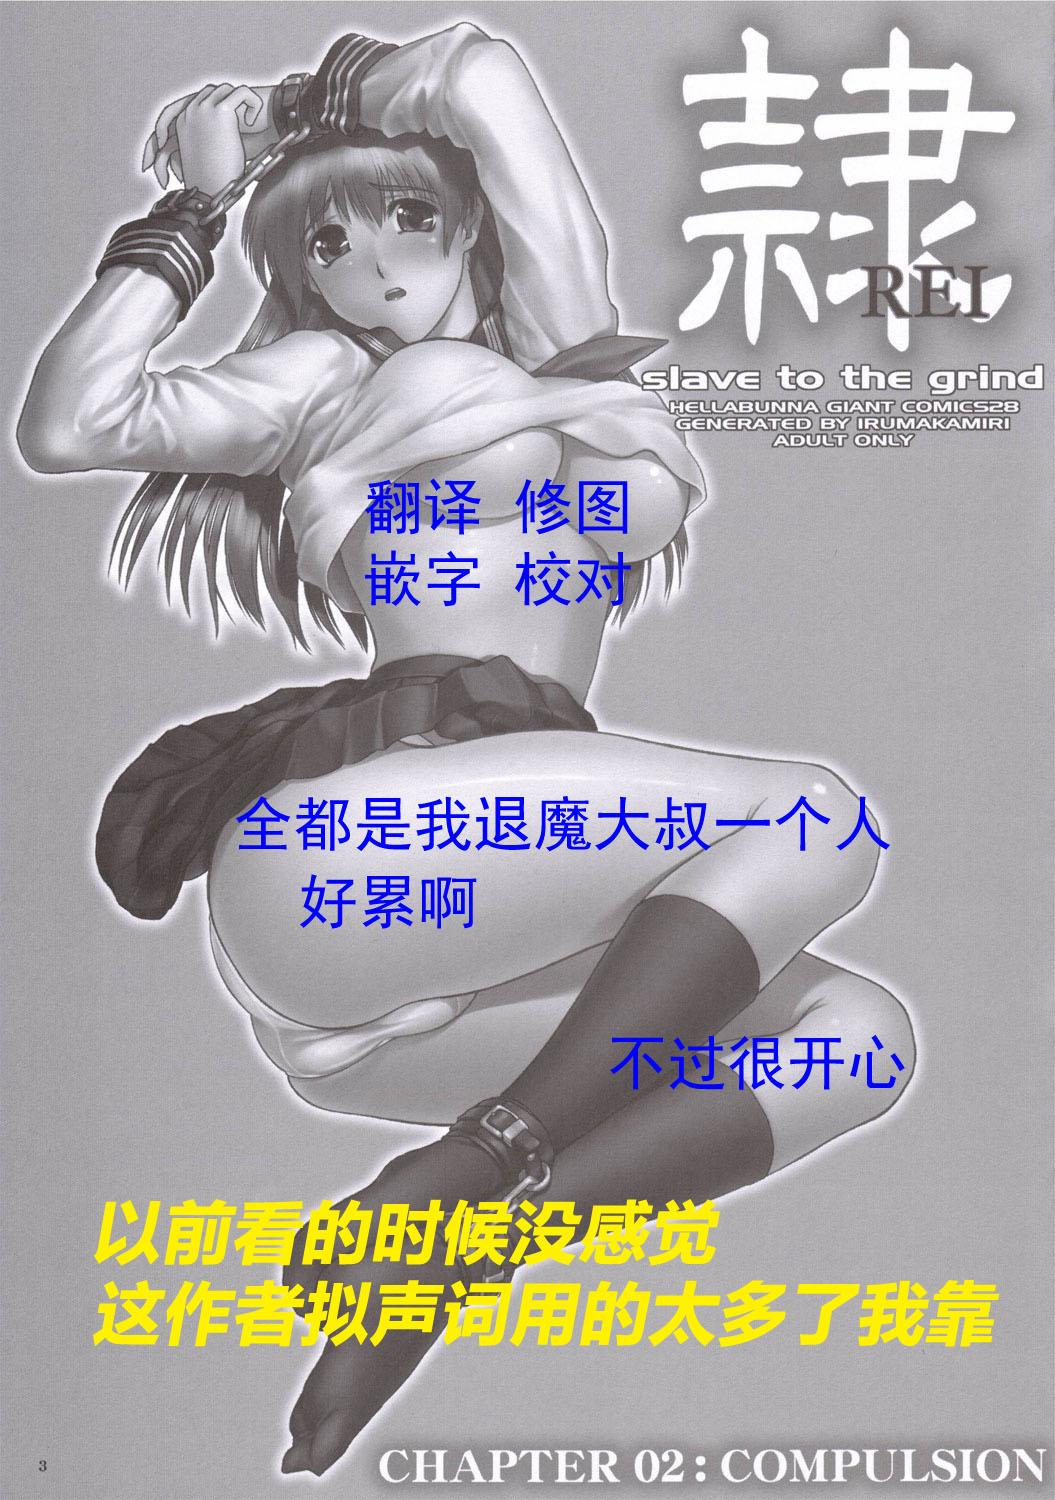 Gets (C69) [Hellabunna (Iruma Kamiri)] REI - slave to the grind - CHAPTER 02: COMPULSION (Dead or Alive) [Chinese] [退魔大叔个人汉化] - Dead or alive Brother - Page 3